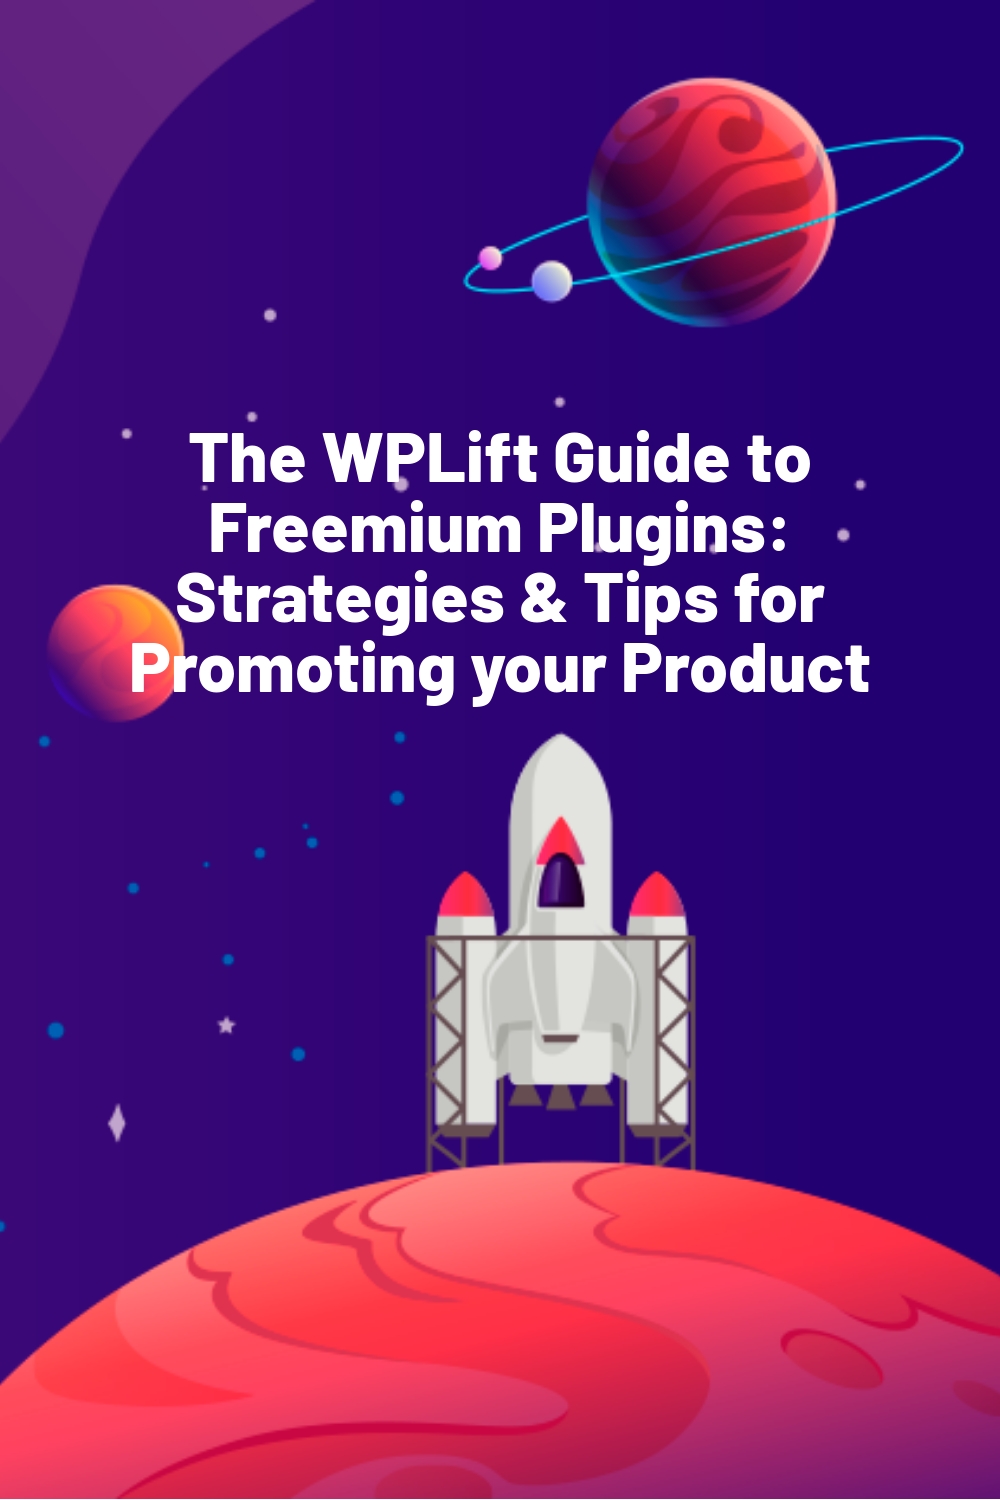 The WPLift Guide to Freemium Plugins: Strategies & Tips for Promoting your Product